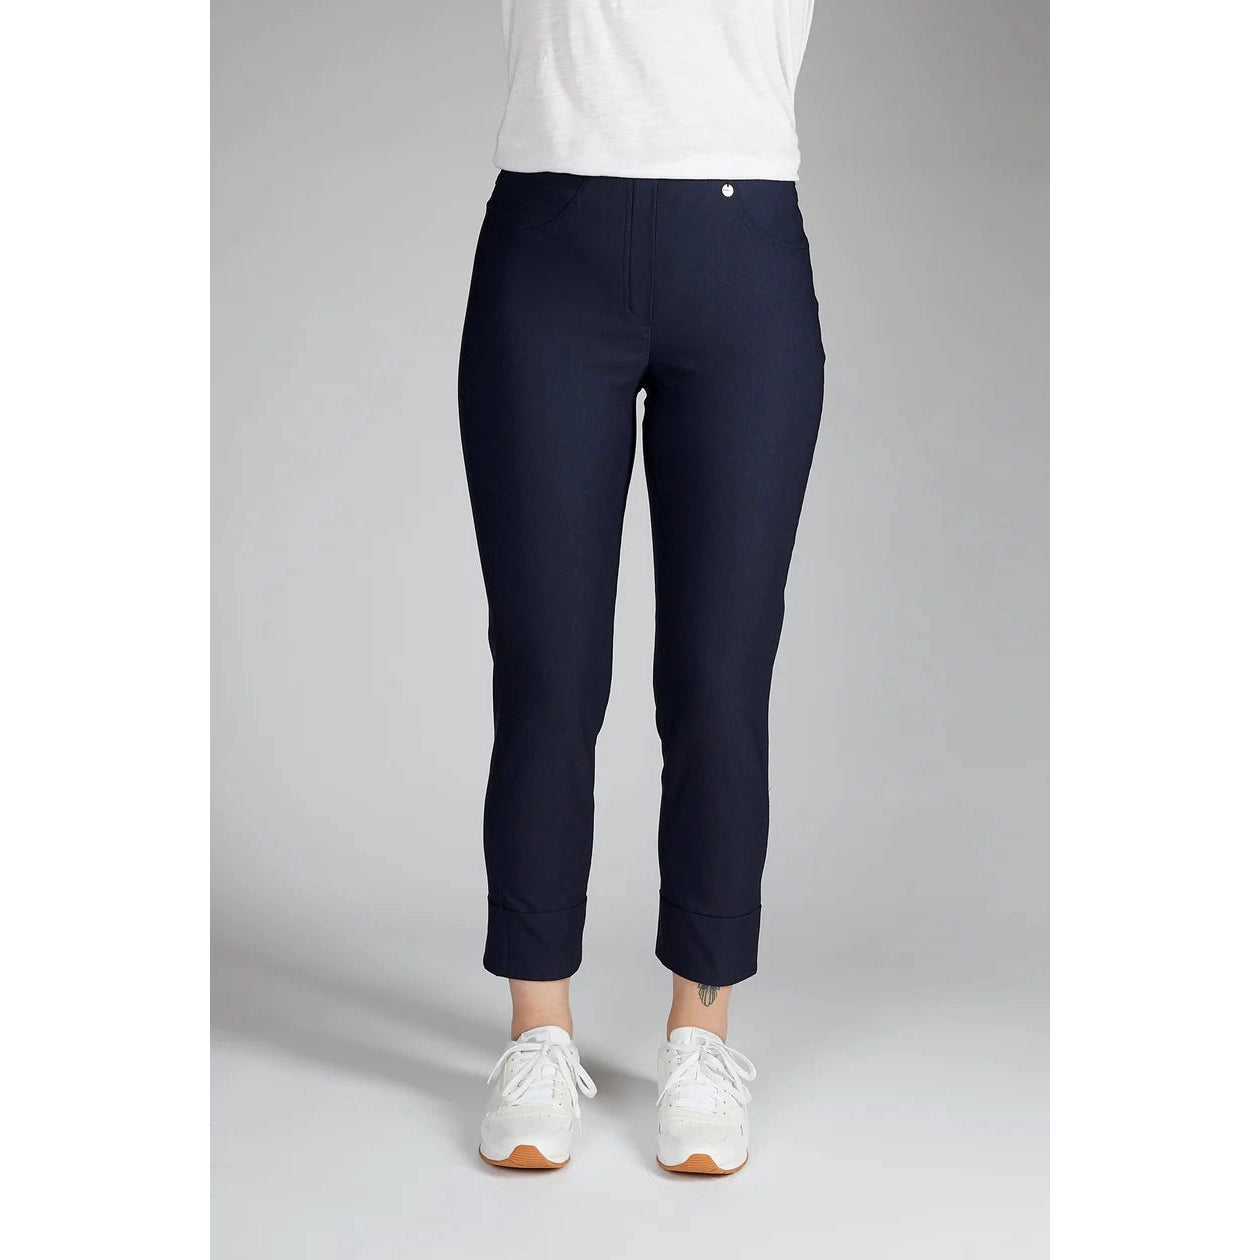 Robell Bella 09 Trousers-Robell-Blue Water Clothing